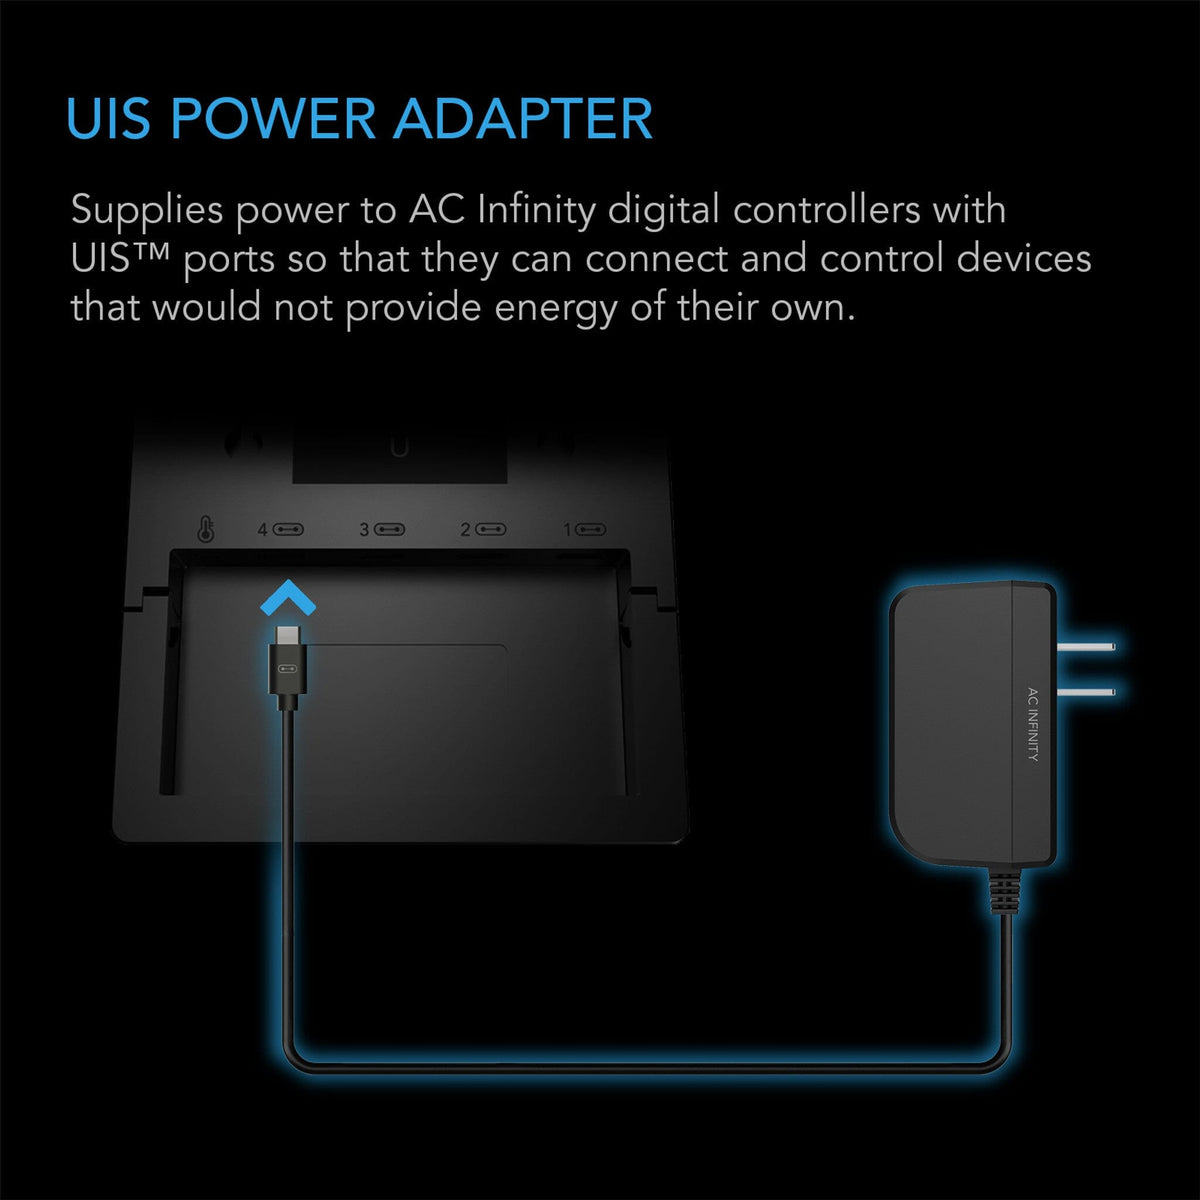 UIS Power Adapter for controllers